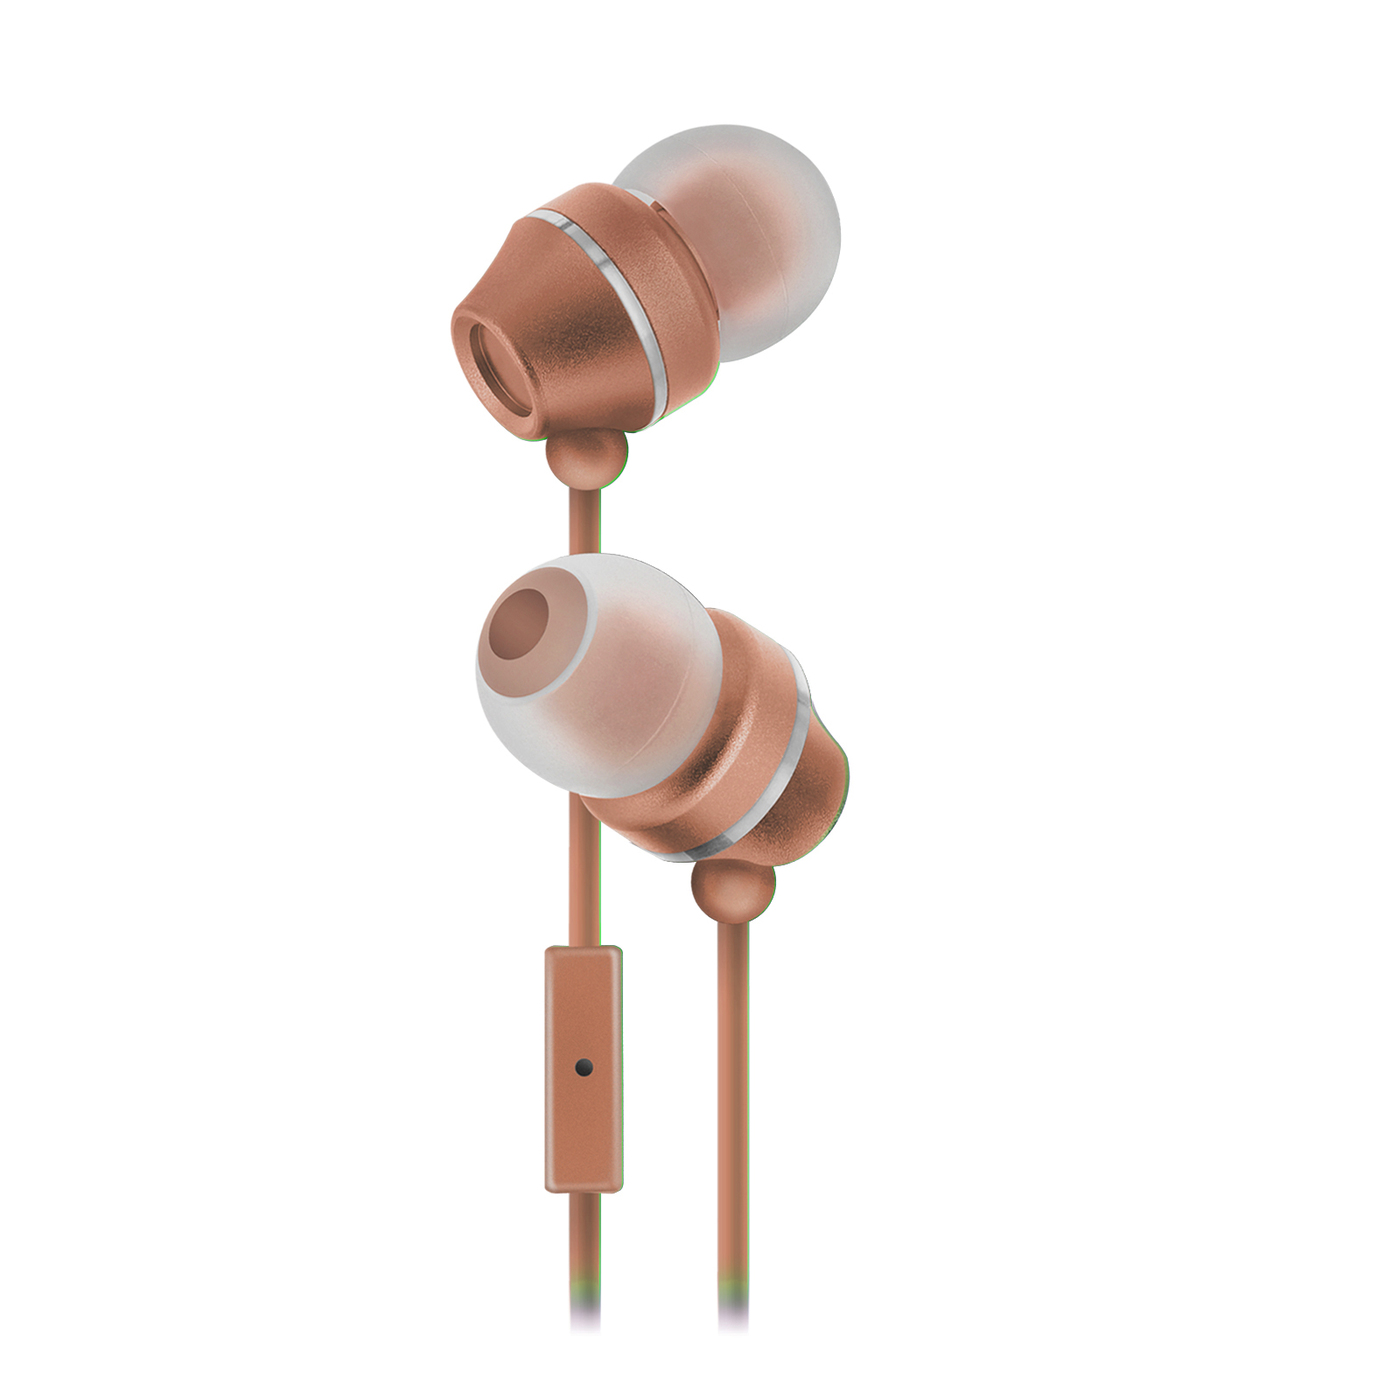 Earbud And In-ear Headphone Sentry Industries Hm165: Stereo Earbuds With In-line Mic In Rose Gold - image 2 of 2